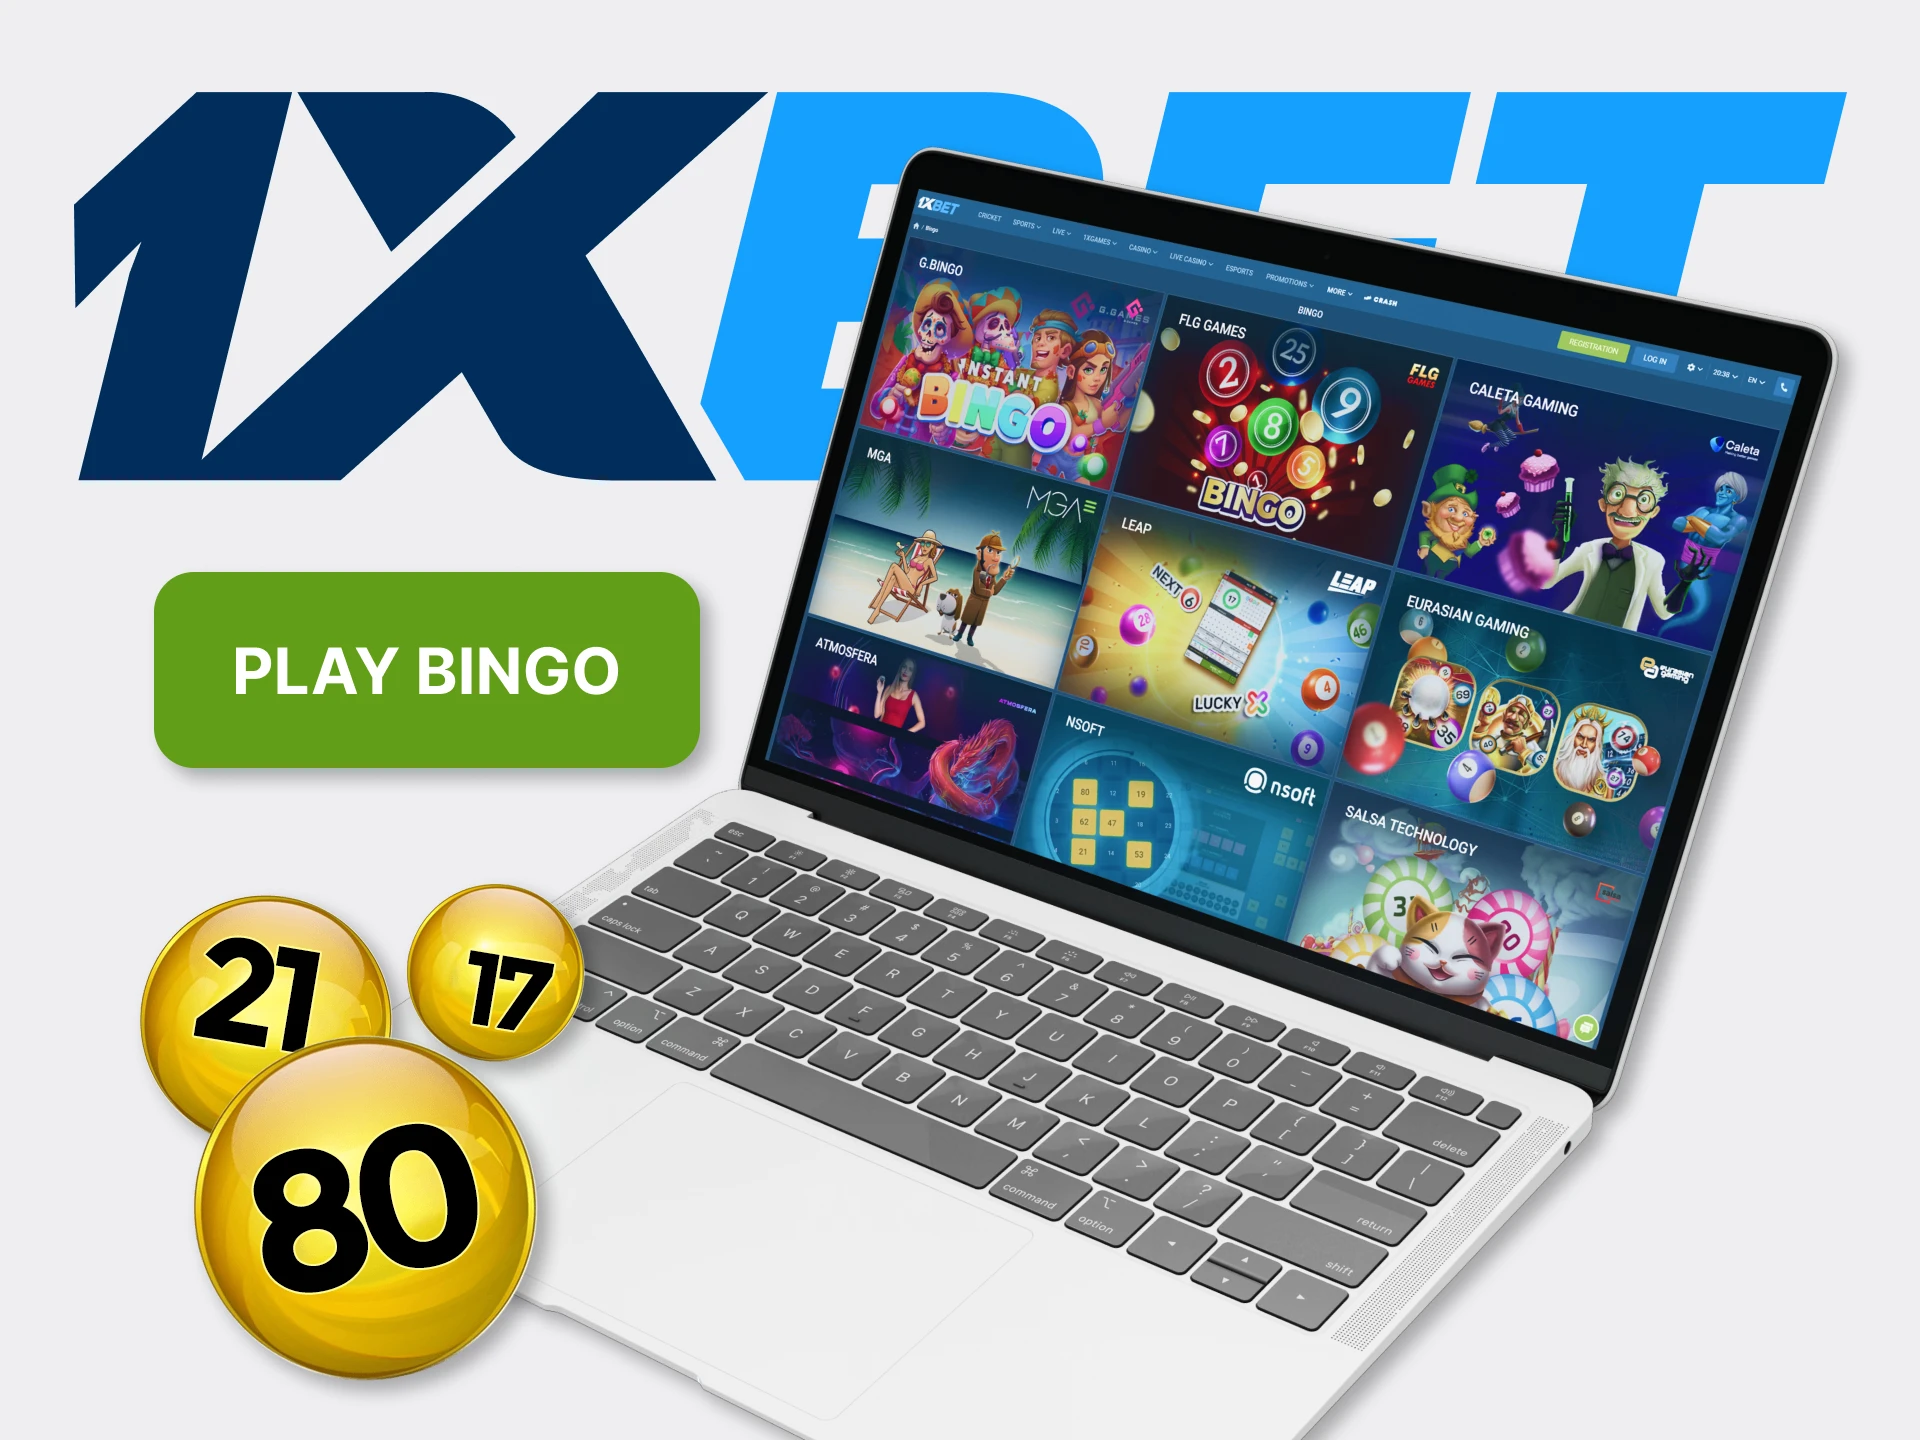 With these instructions, learn how easy it is to start playing bingo at 1xBet.